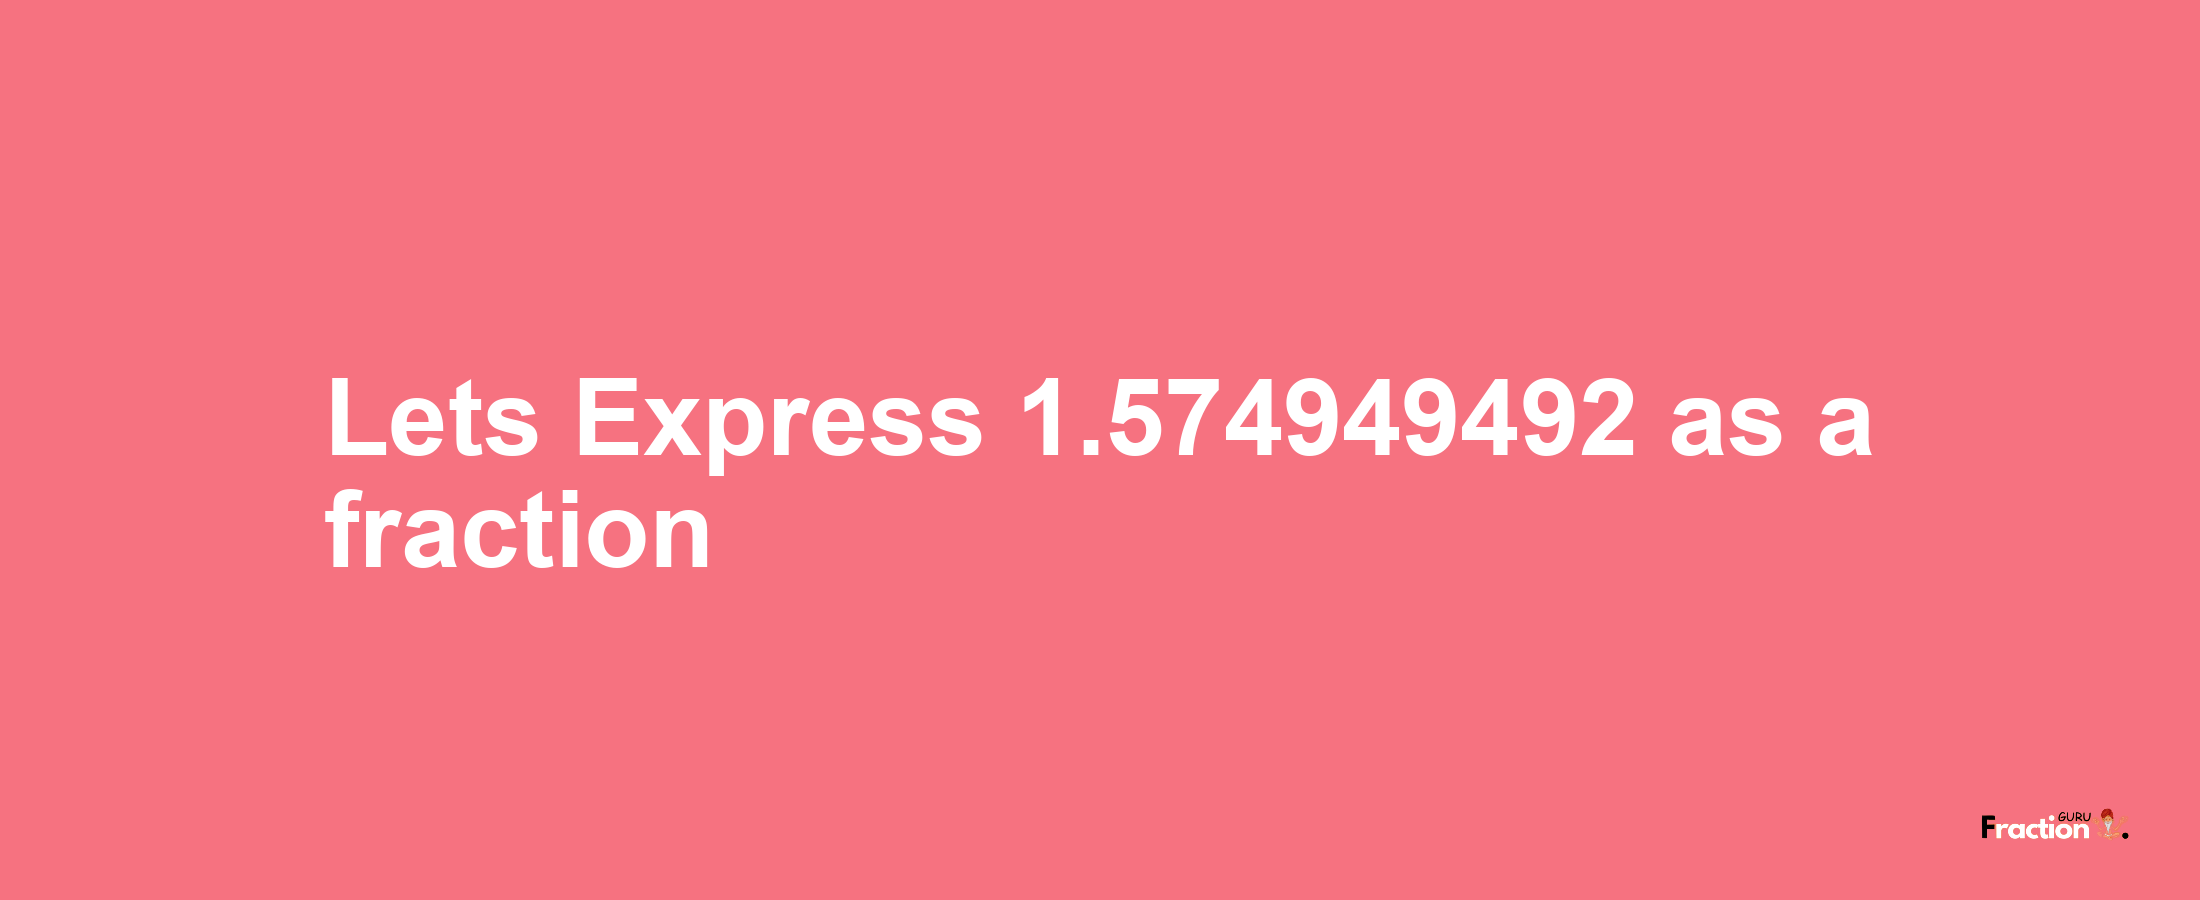 Lets Express 1.574949492 as afraction